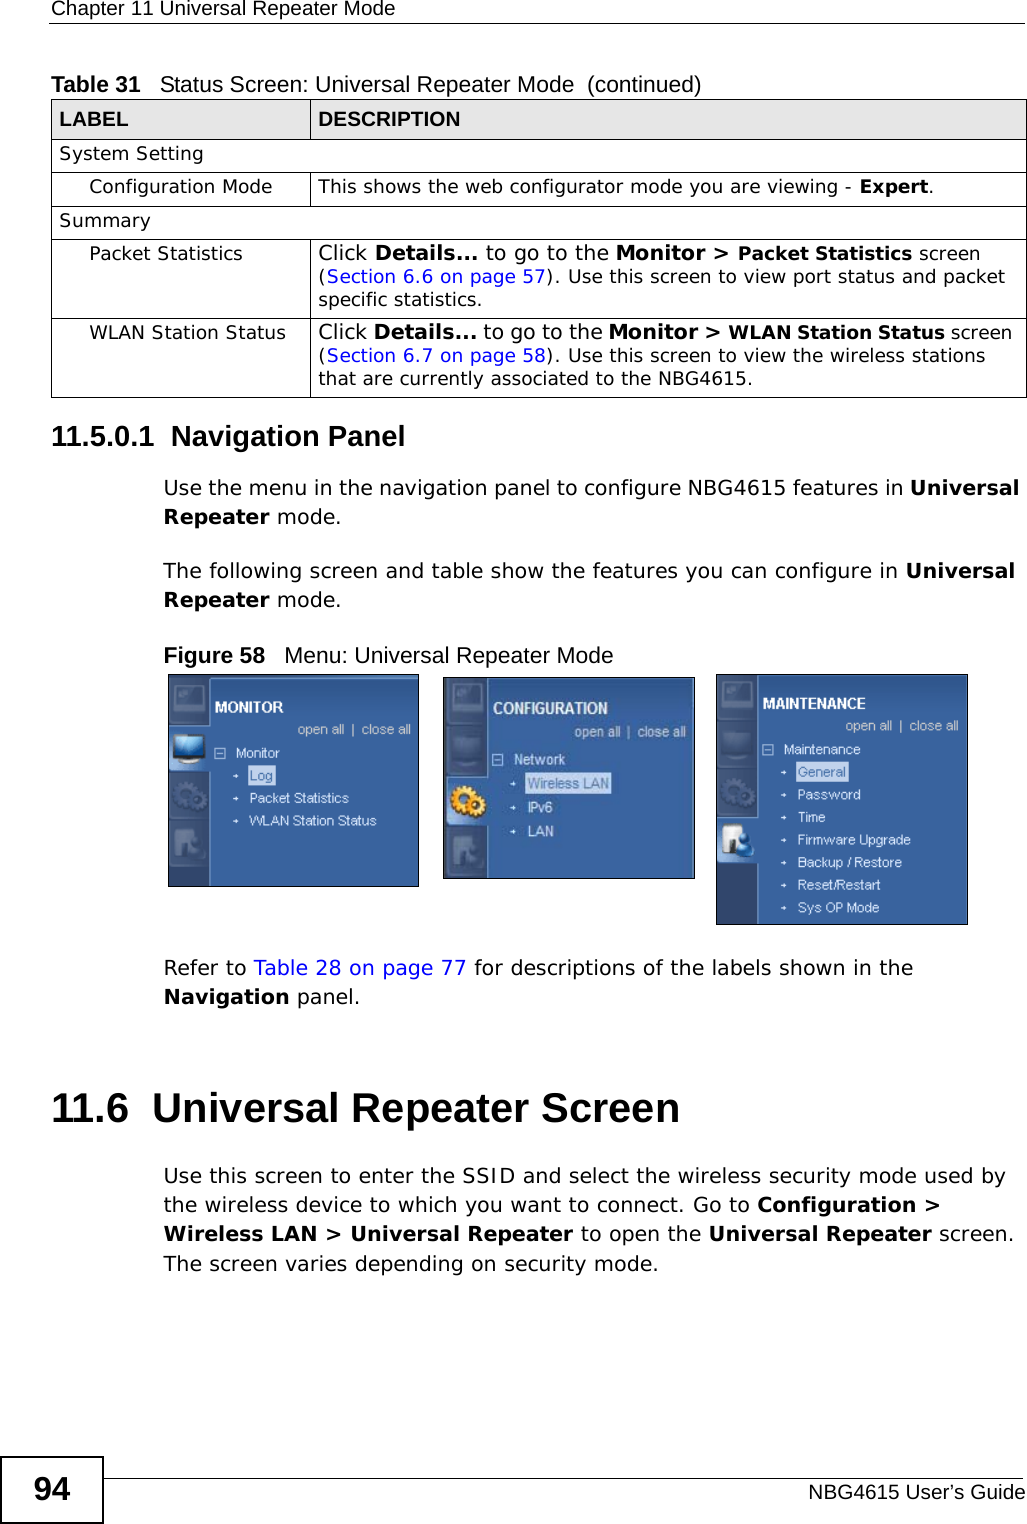 Chapter 11 Universal Repeater ModeNBG4615 User’s Guide9411.5.0.1  Navigation PanelUse the menu in the navigation panel to configure NBG4615 features in Universal Repeater mode.The following screen and table show the features you can configure in Universal Repeater mode.Figure 58   Menu: Universal Repeater Mode Refer to Table 28 on page 77 for descriptions of the labels shown in the Navigation panel.11.6  Universal Repeater ScreenUse this screen to enter the SSID and select the wireless security mode used by the wireless device to which you want to connect. Go to Configuration &gt; Wireless LAN &gt; Universal Repeater to open the Universal Repeater screen. The screen varies depending on security mode.System SettingConfiguration Mode This shows the web configurator mode you are viewing - Expert.SummaryPacket Statistics Click Details... to go to the Monitor &gt; Packet Statistics screen (Section 6.6 on page 57). Use this screen to view port status and packet specific statistics.WLAN Station Status Click Details... to go to the Monitor &gt; WLAN Station Status screen (Section 6.7 on page 58). Use this screen to view the wireless stations that are currently associated to the NBG4615.Table 31   Status Screen: Universal Repeater Mode  (continued)LABEL DESCRIPTION